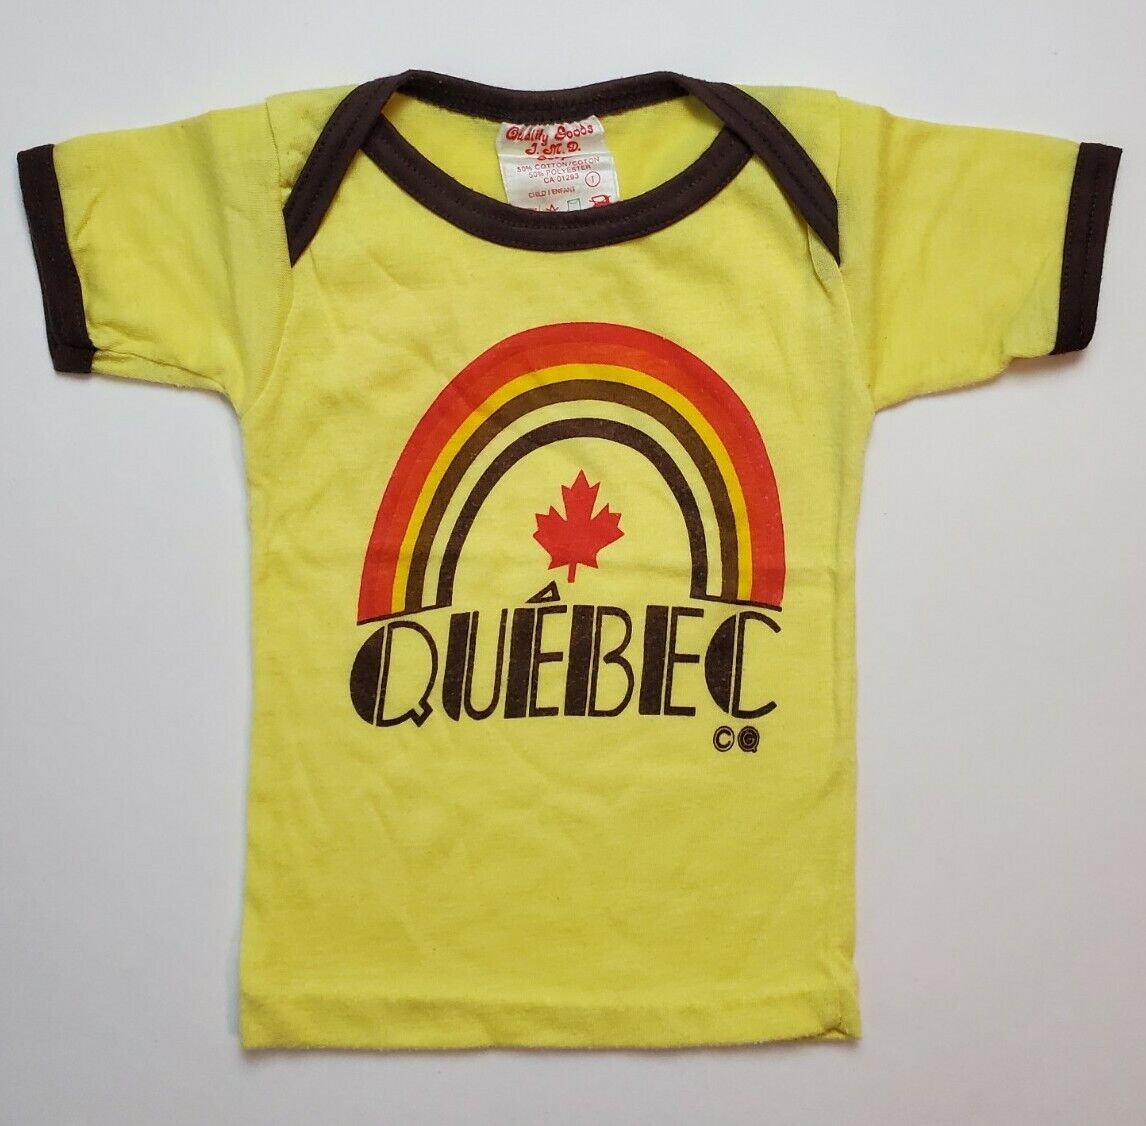 Vintage 70s 80s Ringer Tee T-Shirt Yellow Baby 6-9 Months Quebec Canada 